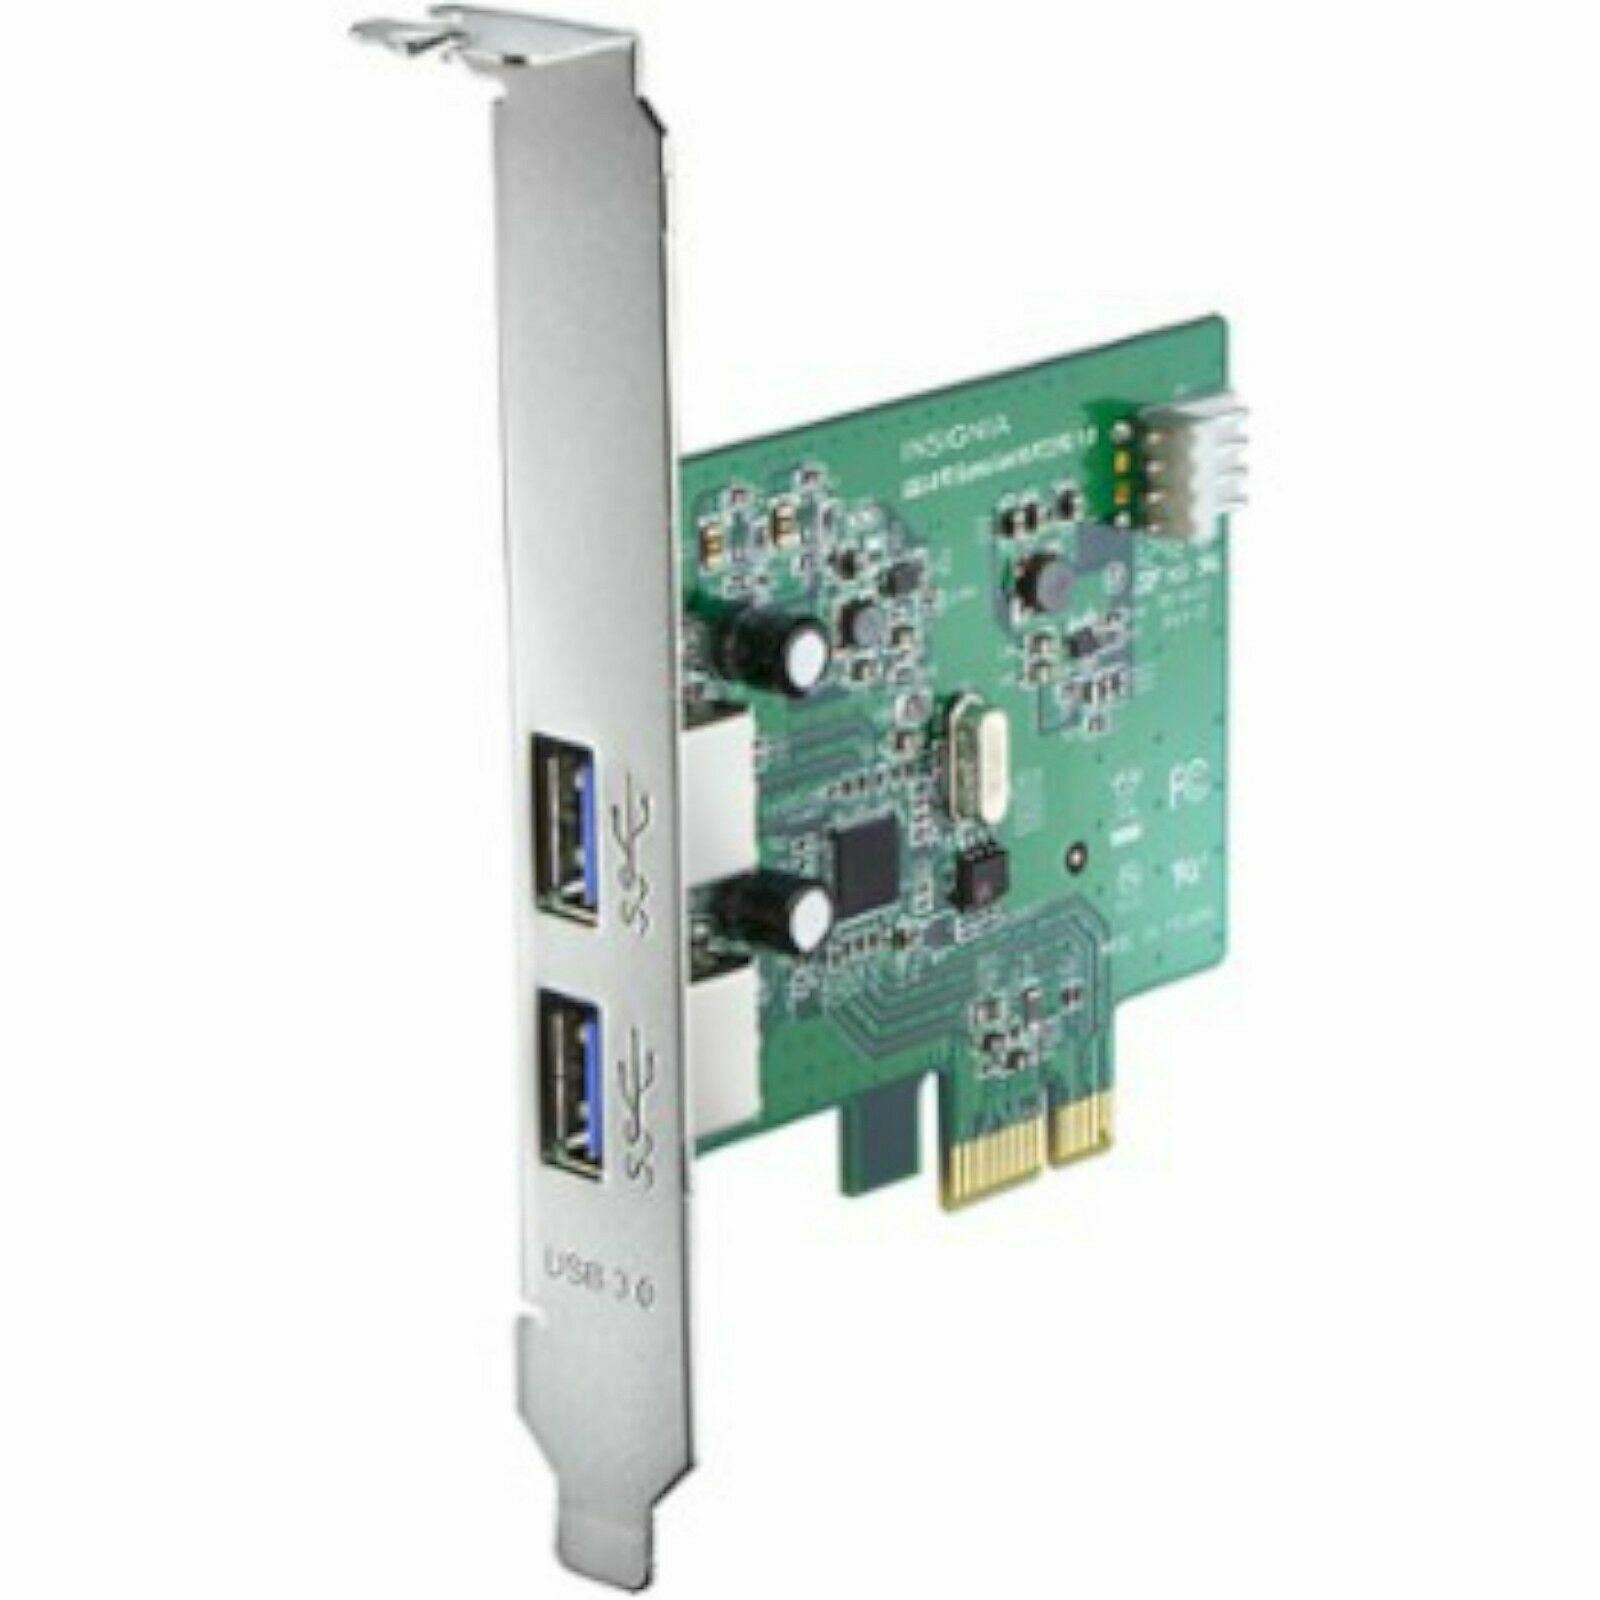 NEW Dual Port USB 3.0 Expansion PCI Express Interface Card NS-PCCUP53 2-Port